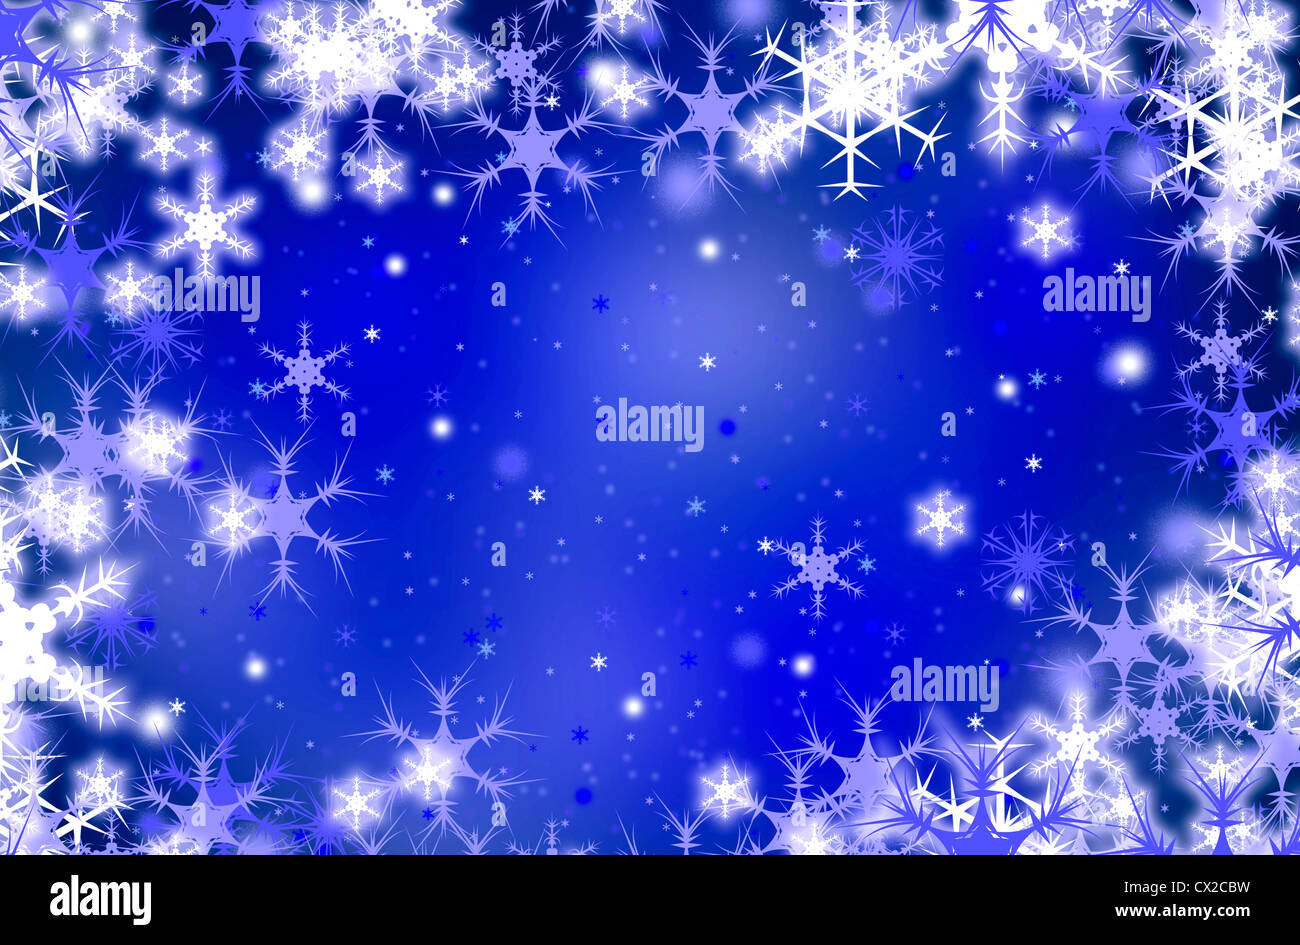 Blue Christmas background textured with flakes of snow Stock Photo